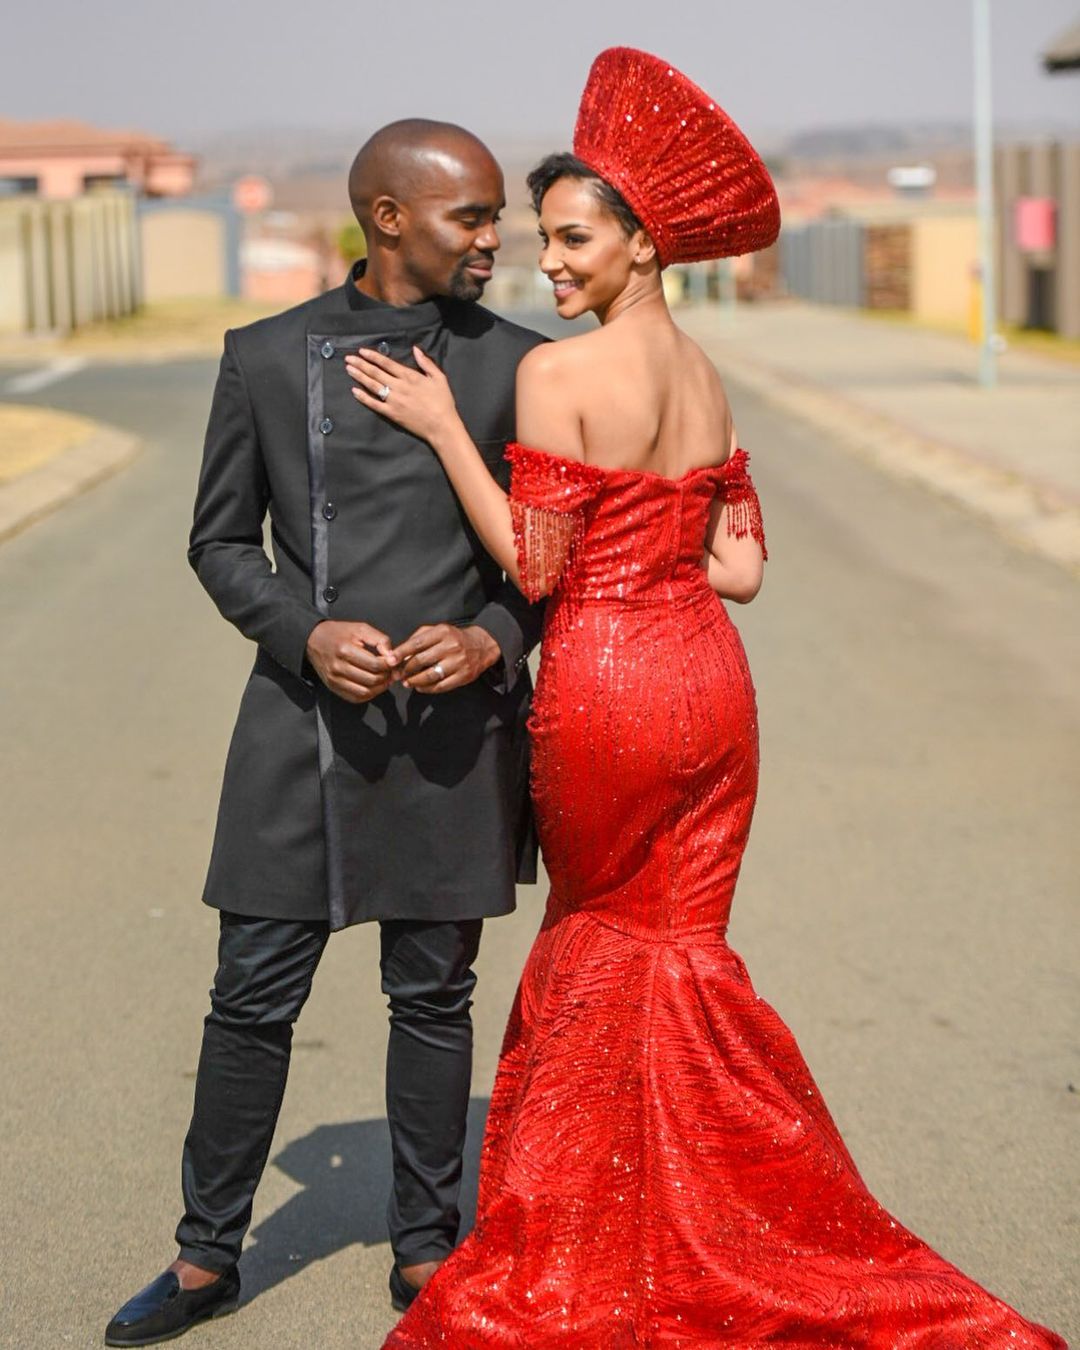 Former Miss SA Liesl Laurie and Dr Musa Mthombeni tie the knot